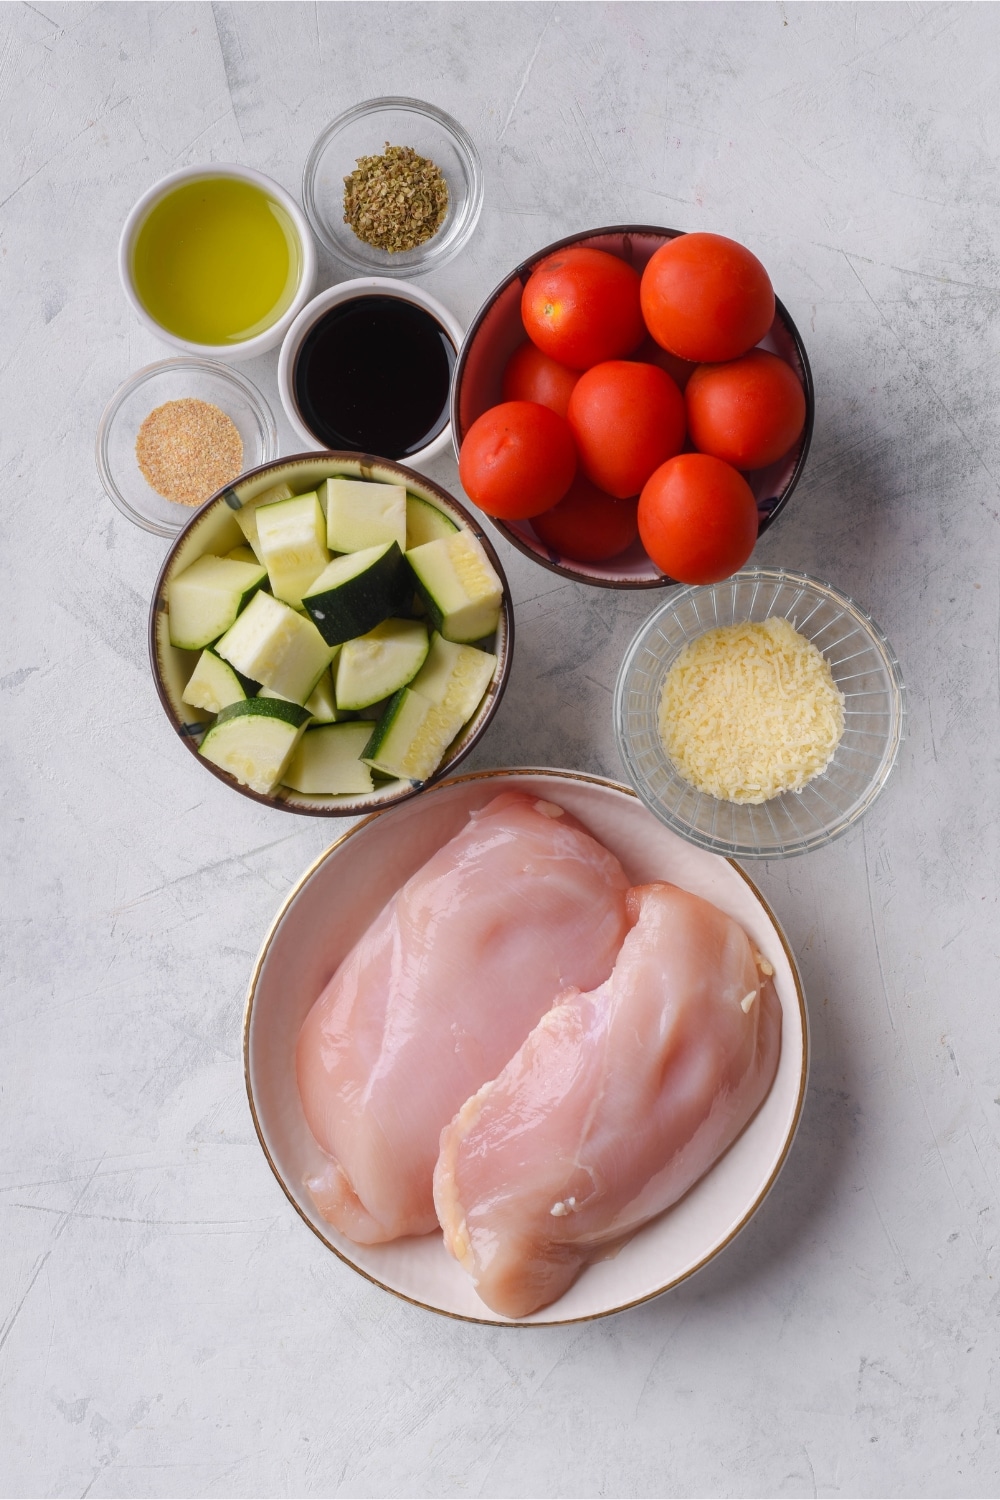 A plate of raw chicken filets, bowls of cherry tomatoes and chopped zucchini, and smaller bowls of seasonings and oil.